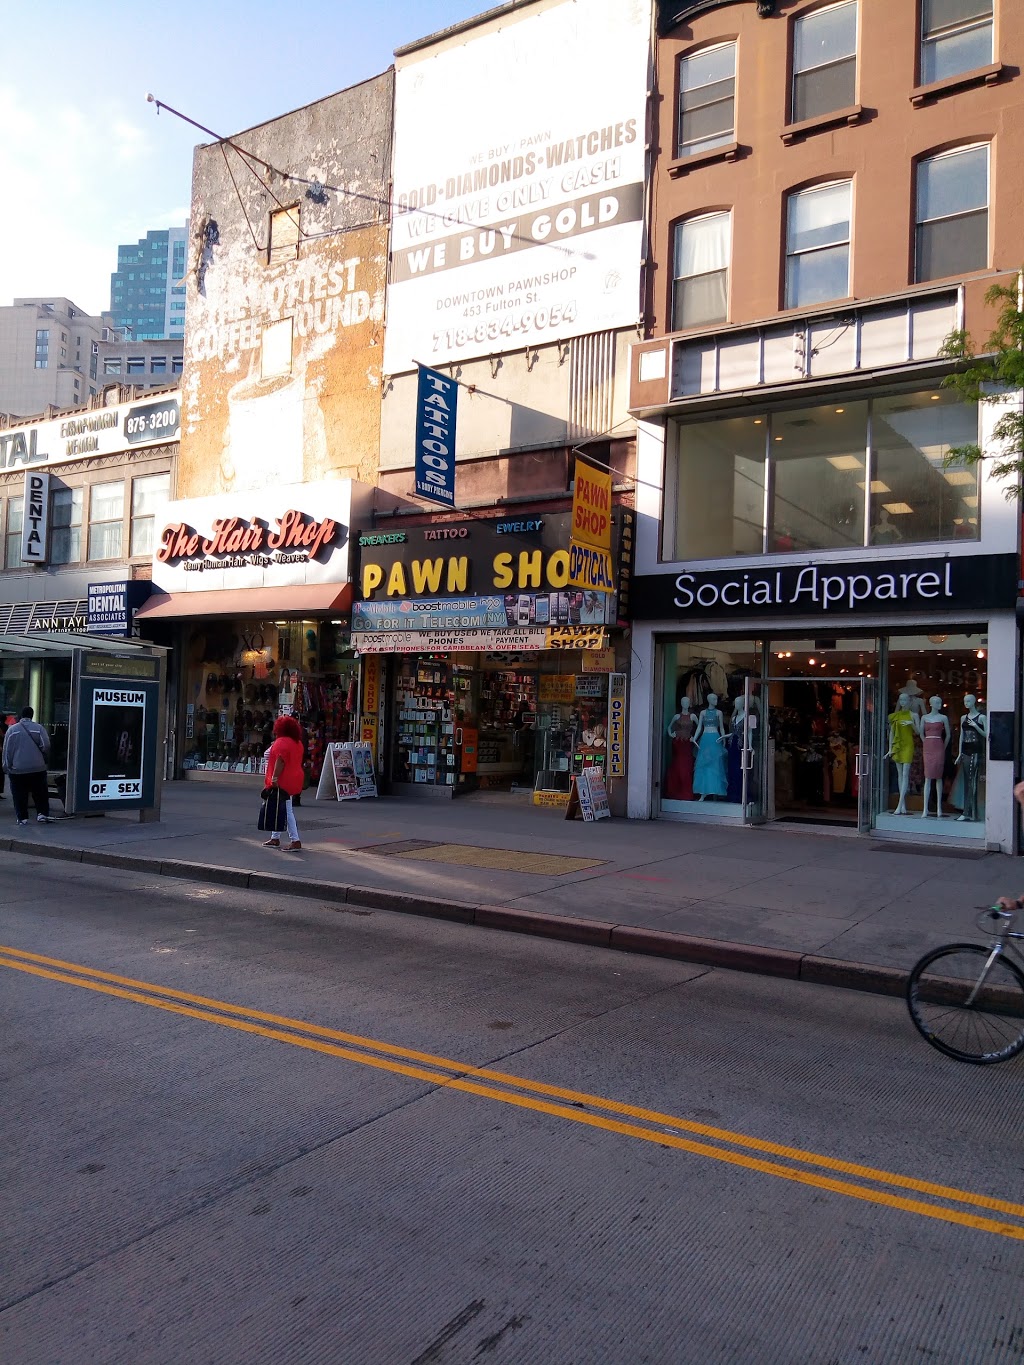 damien lamaro recommends pawn shops fulton ny pic